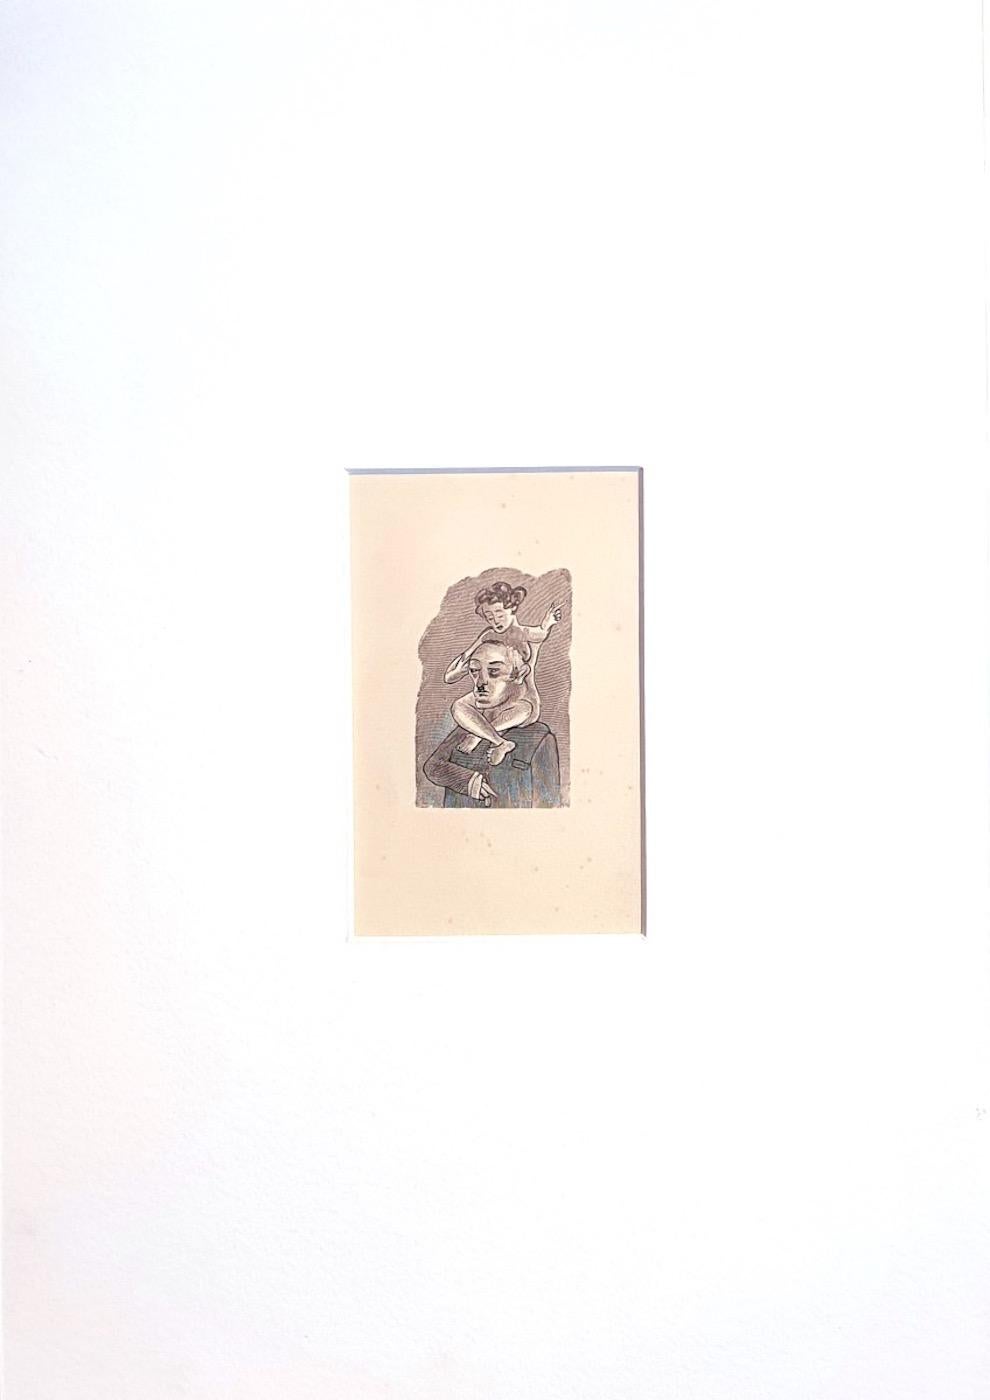 Nude Burden is an original zincography artwork realized by Mino Maccari.

Included a white Passepartout: 49 x 34

The state of preservation is very good.

The artwork represents a man with a nude woman on his shoulder, a satiric style of Maccari